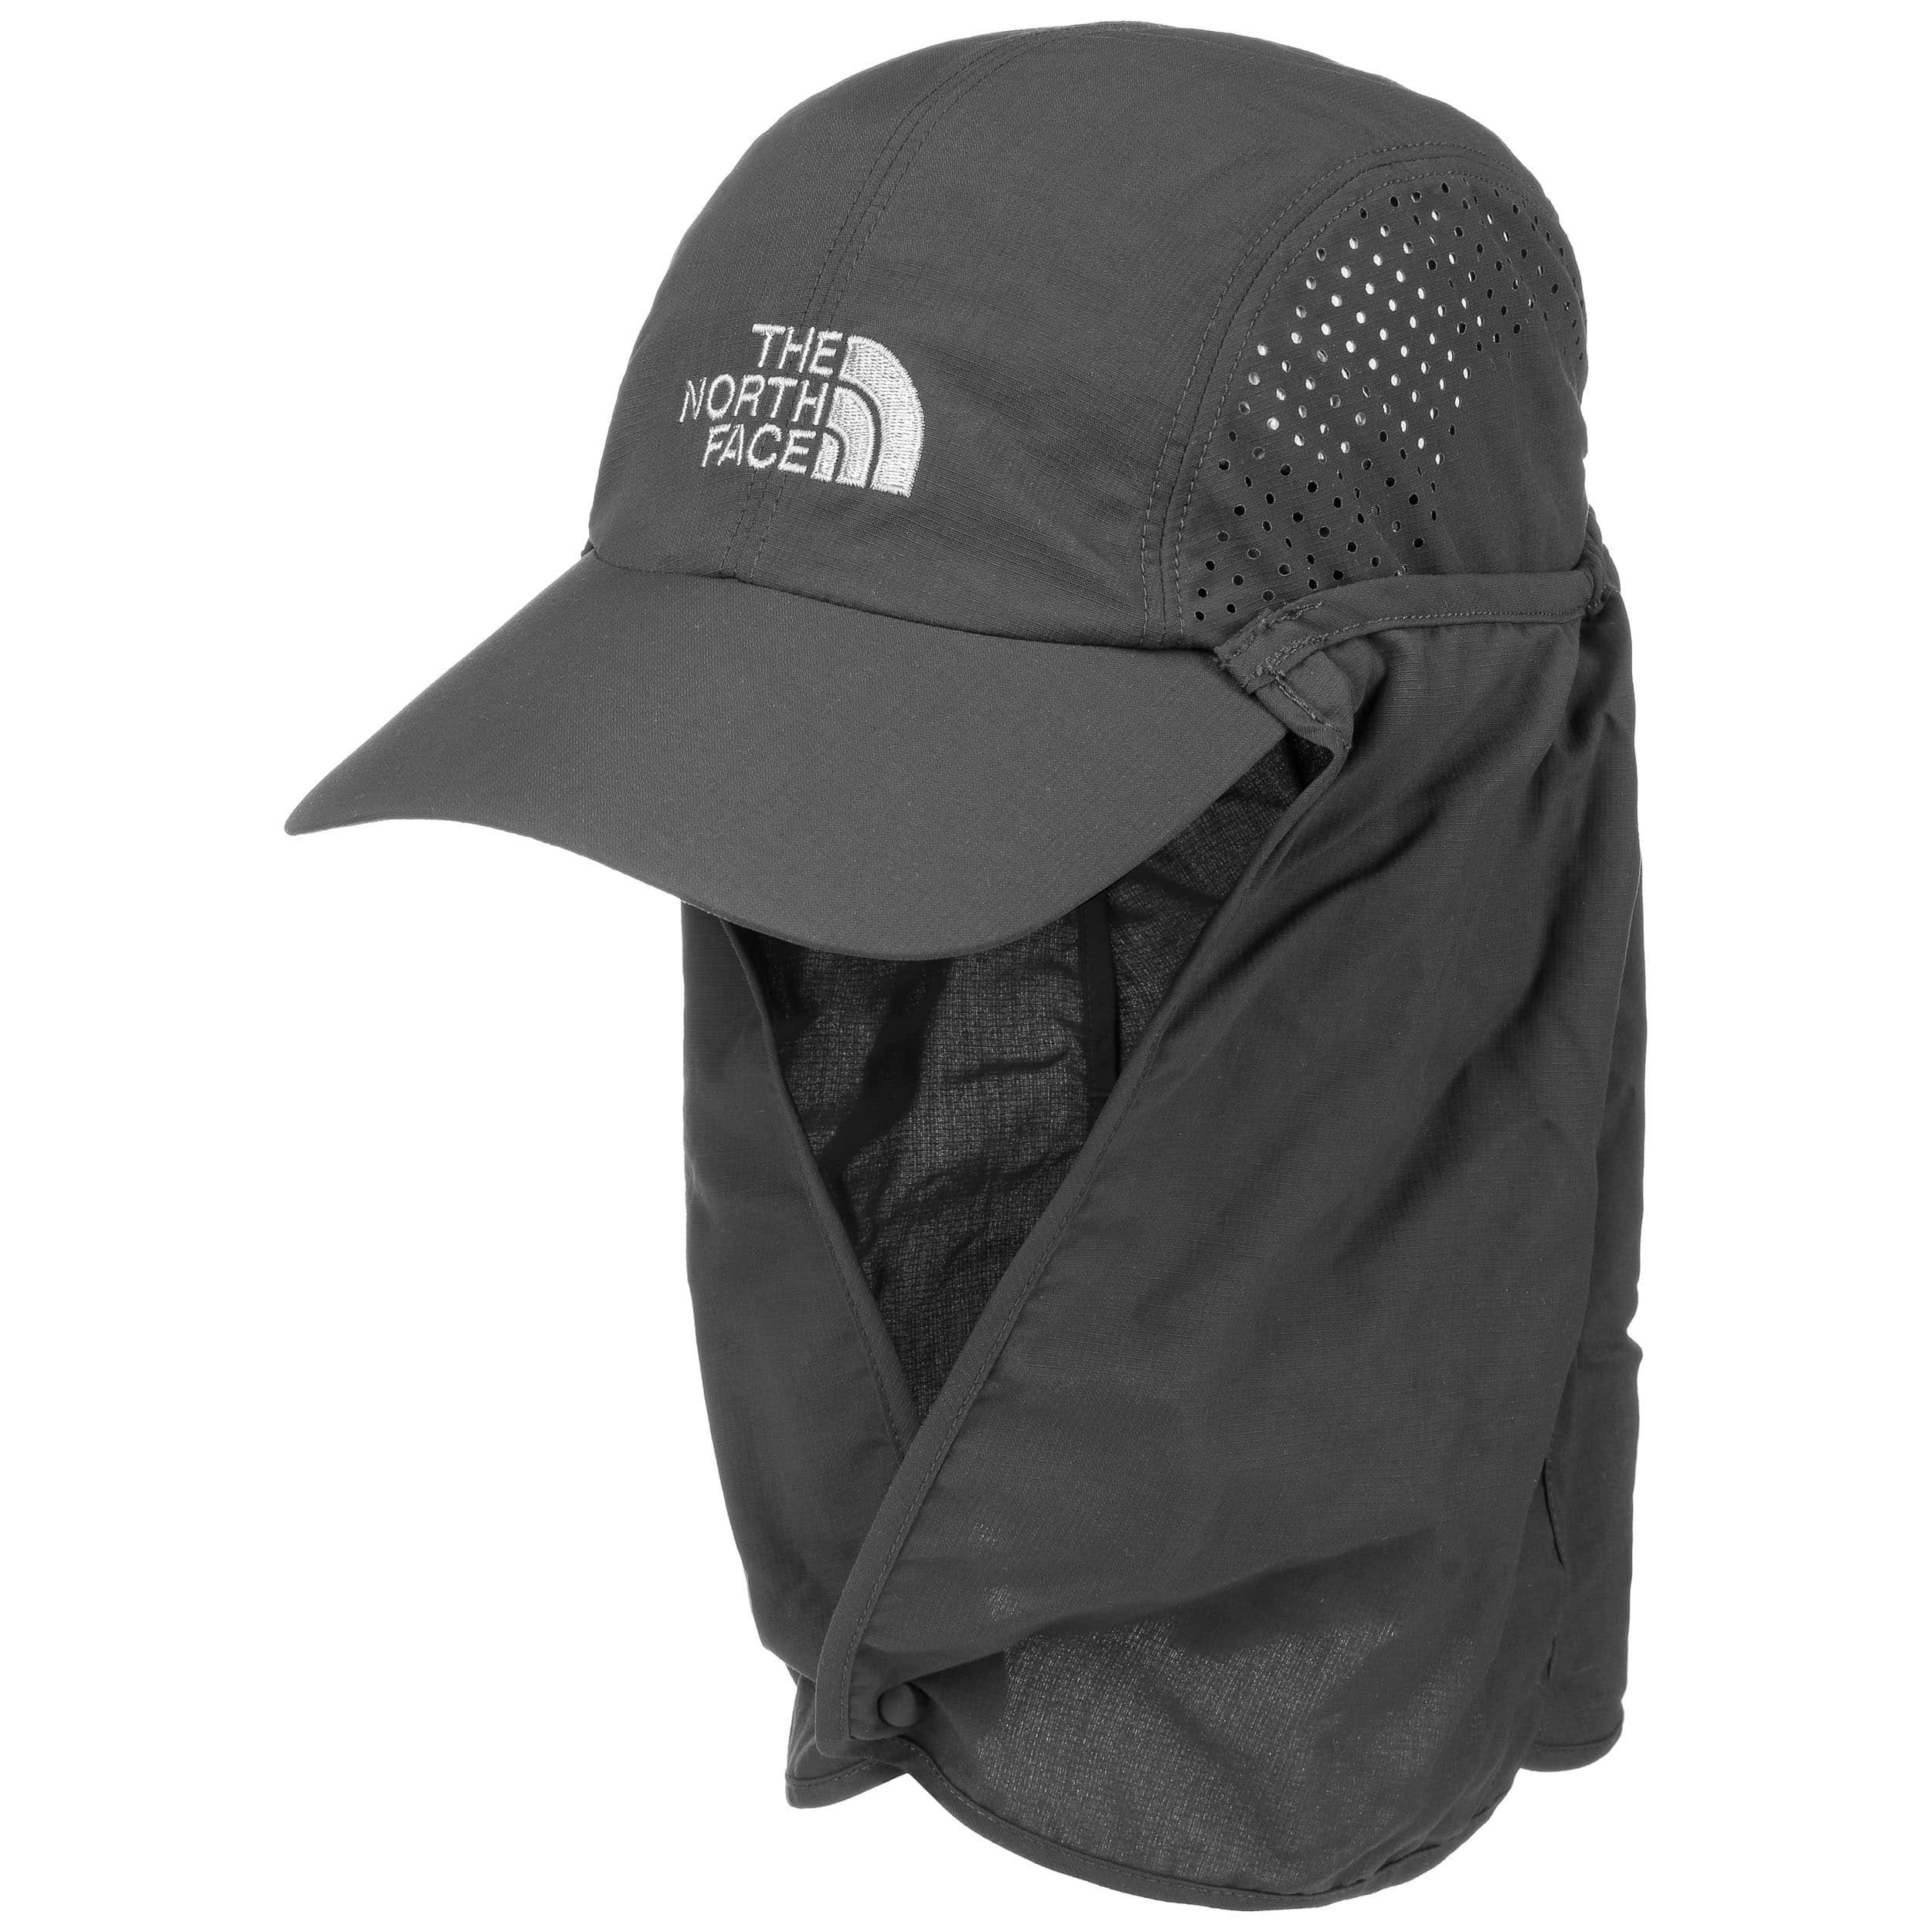 Sun Shield Cap by The North Face - 40,95 €